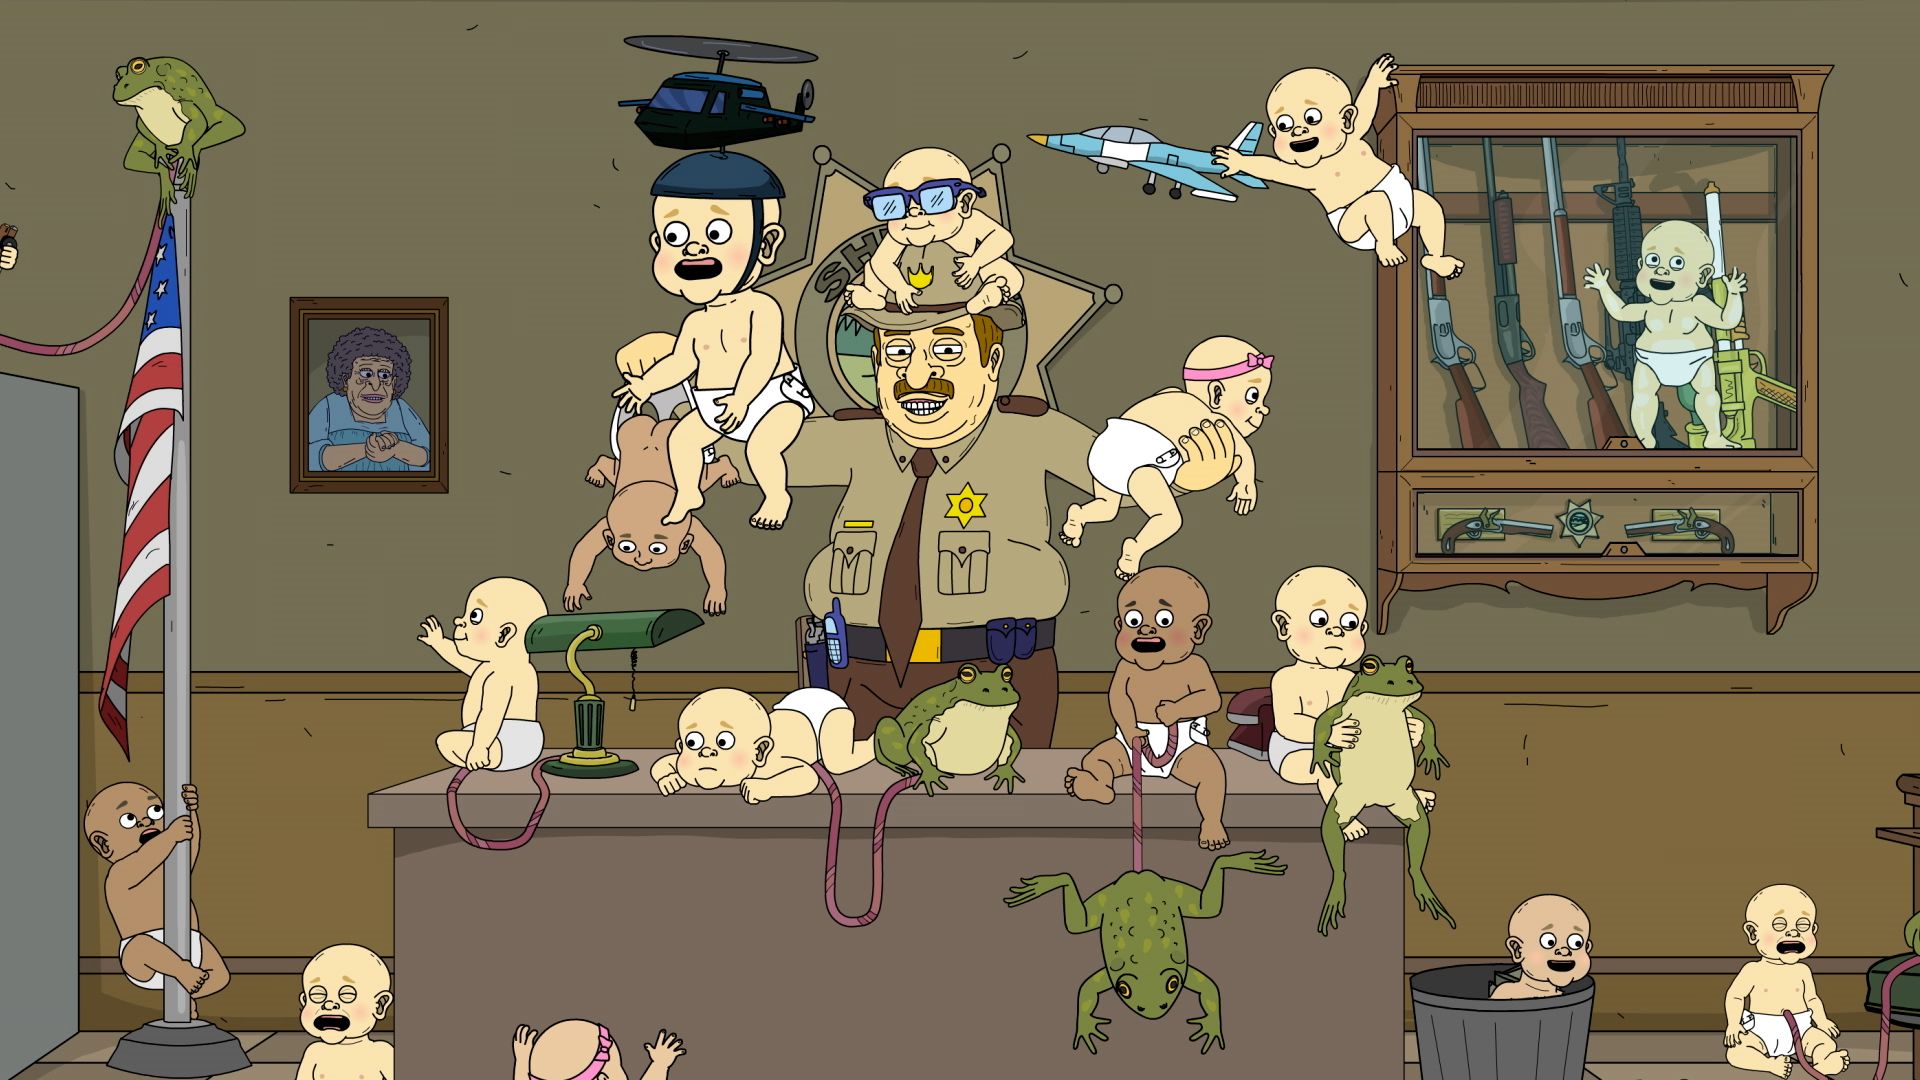 On March 24rd, Adult Swim series Mr. Pickles and spinoff Momma Named Me  Sheriff were added to HBO Max, at least in Poland. : r/HBOMAX